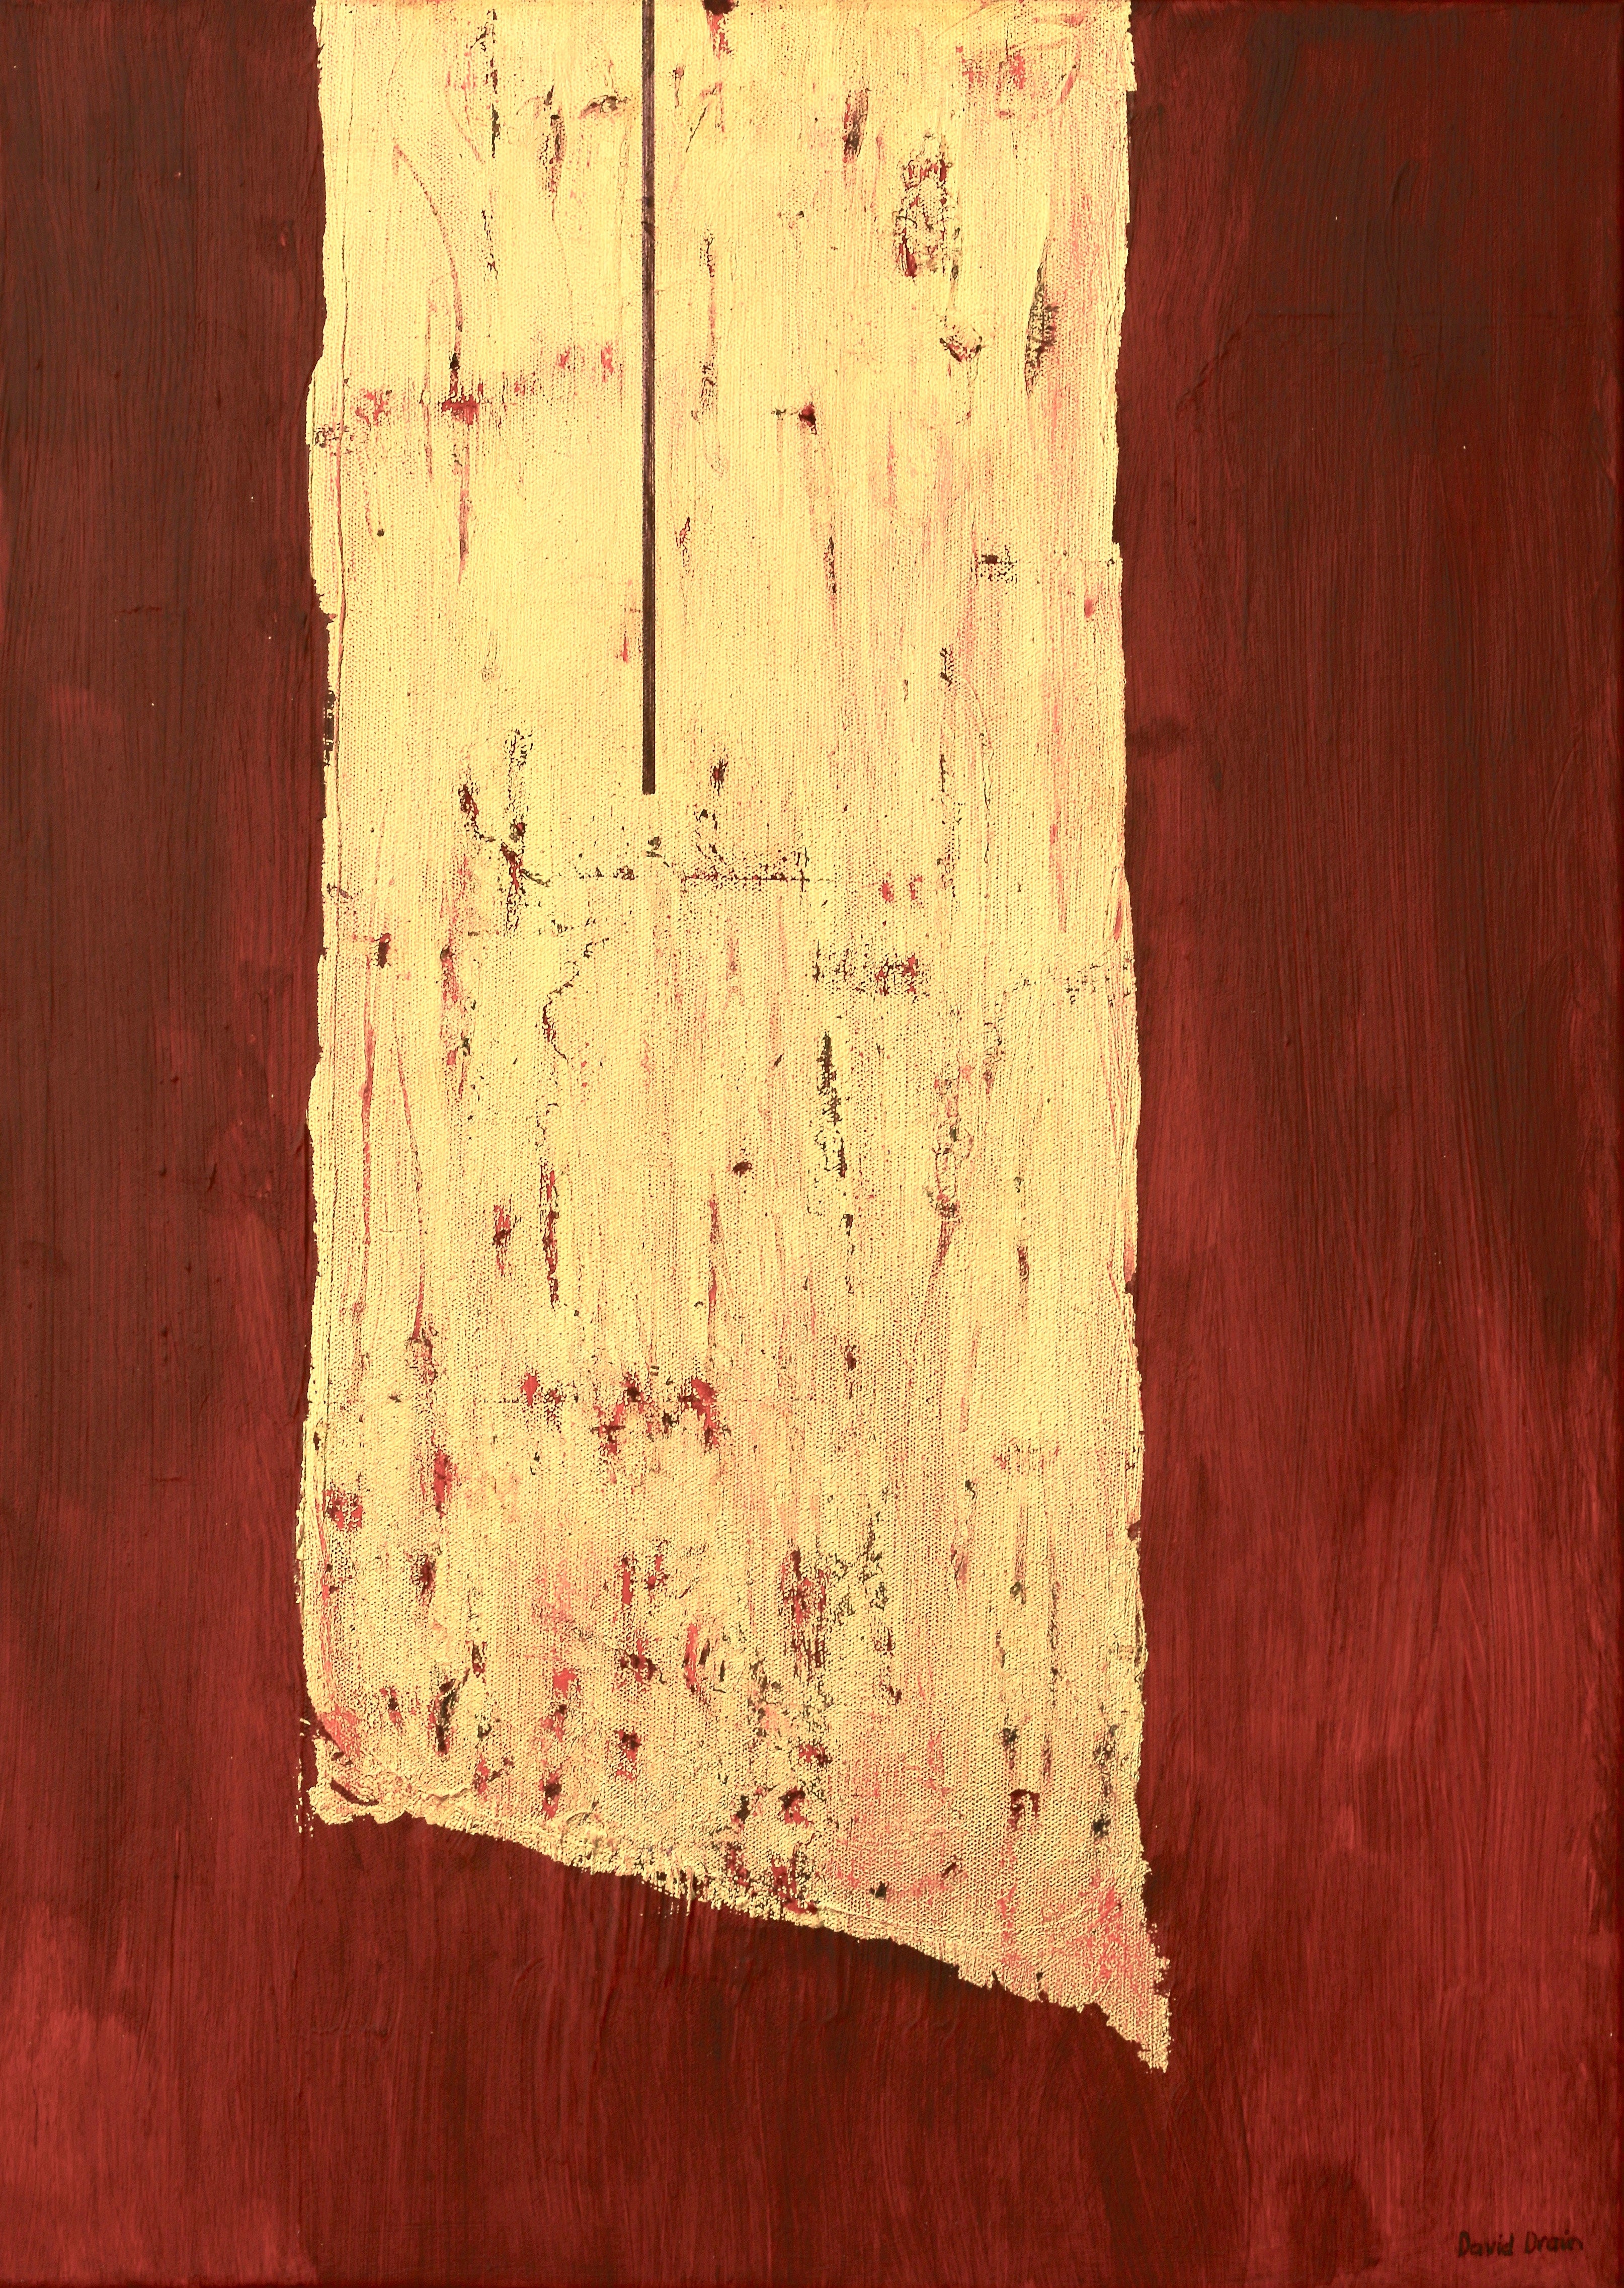 Red & Gold III (SOLD) <br> 70 x 50 x 2 cm